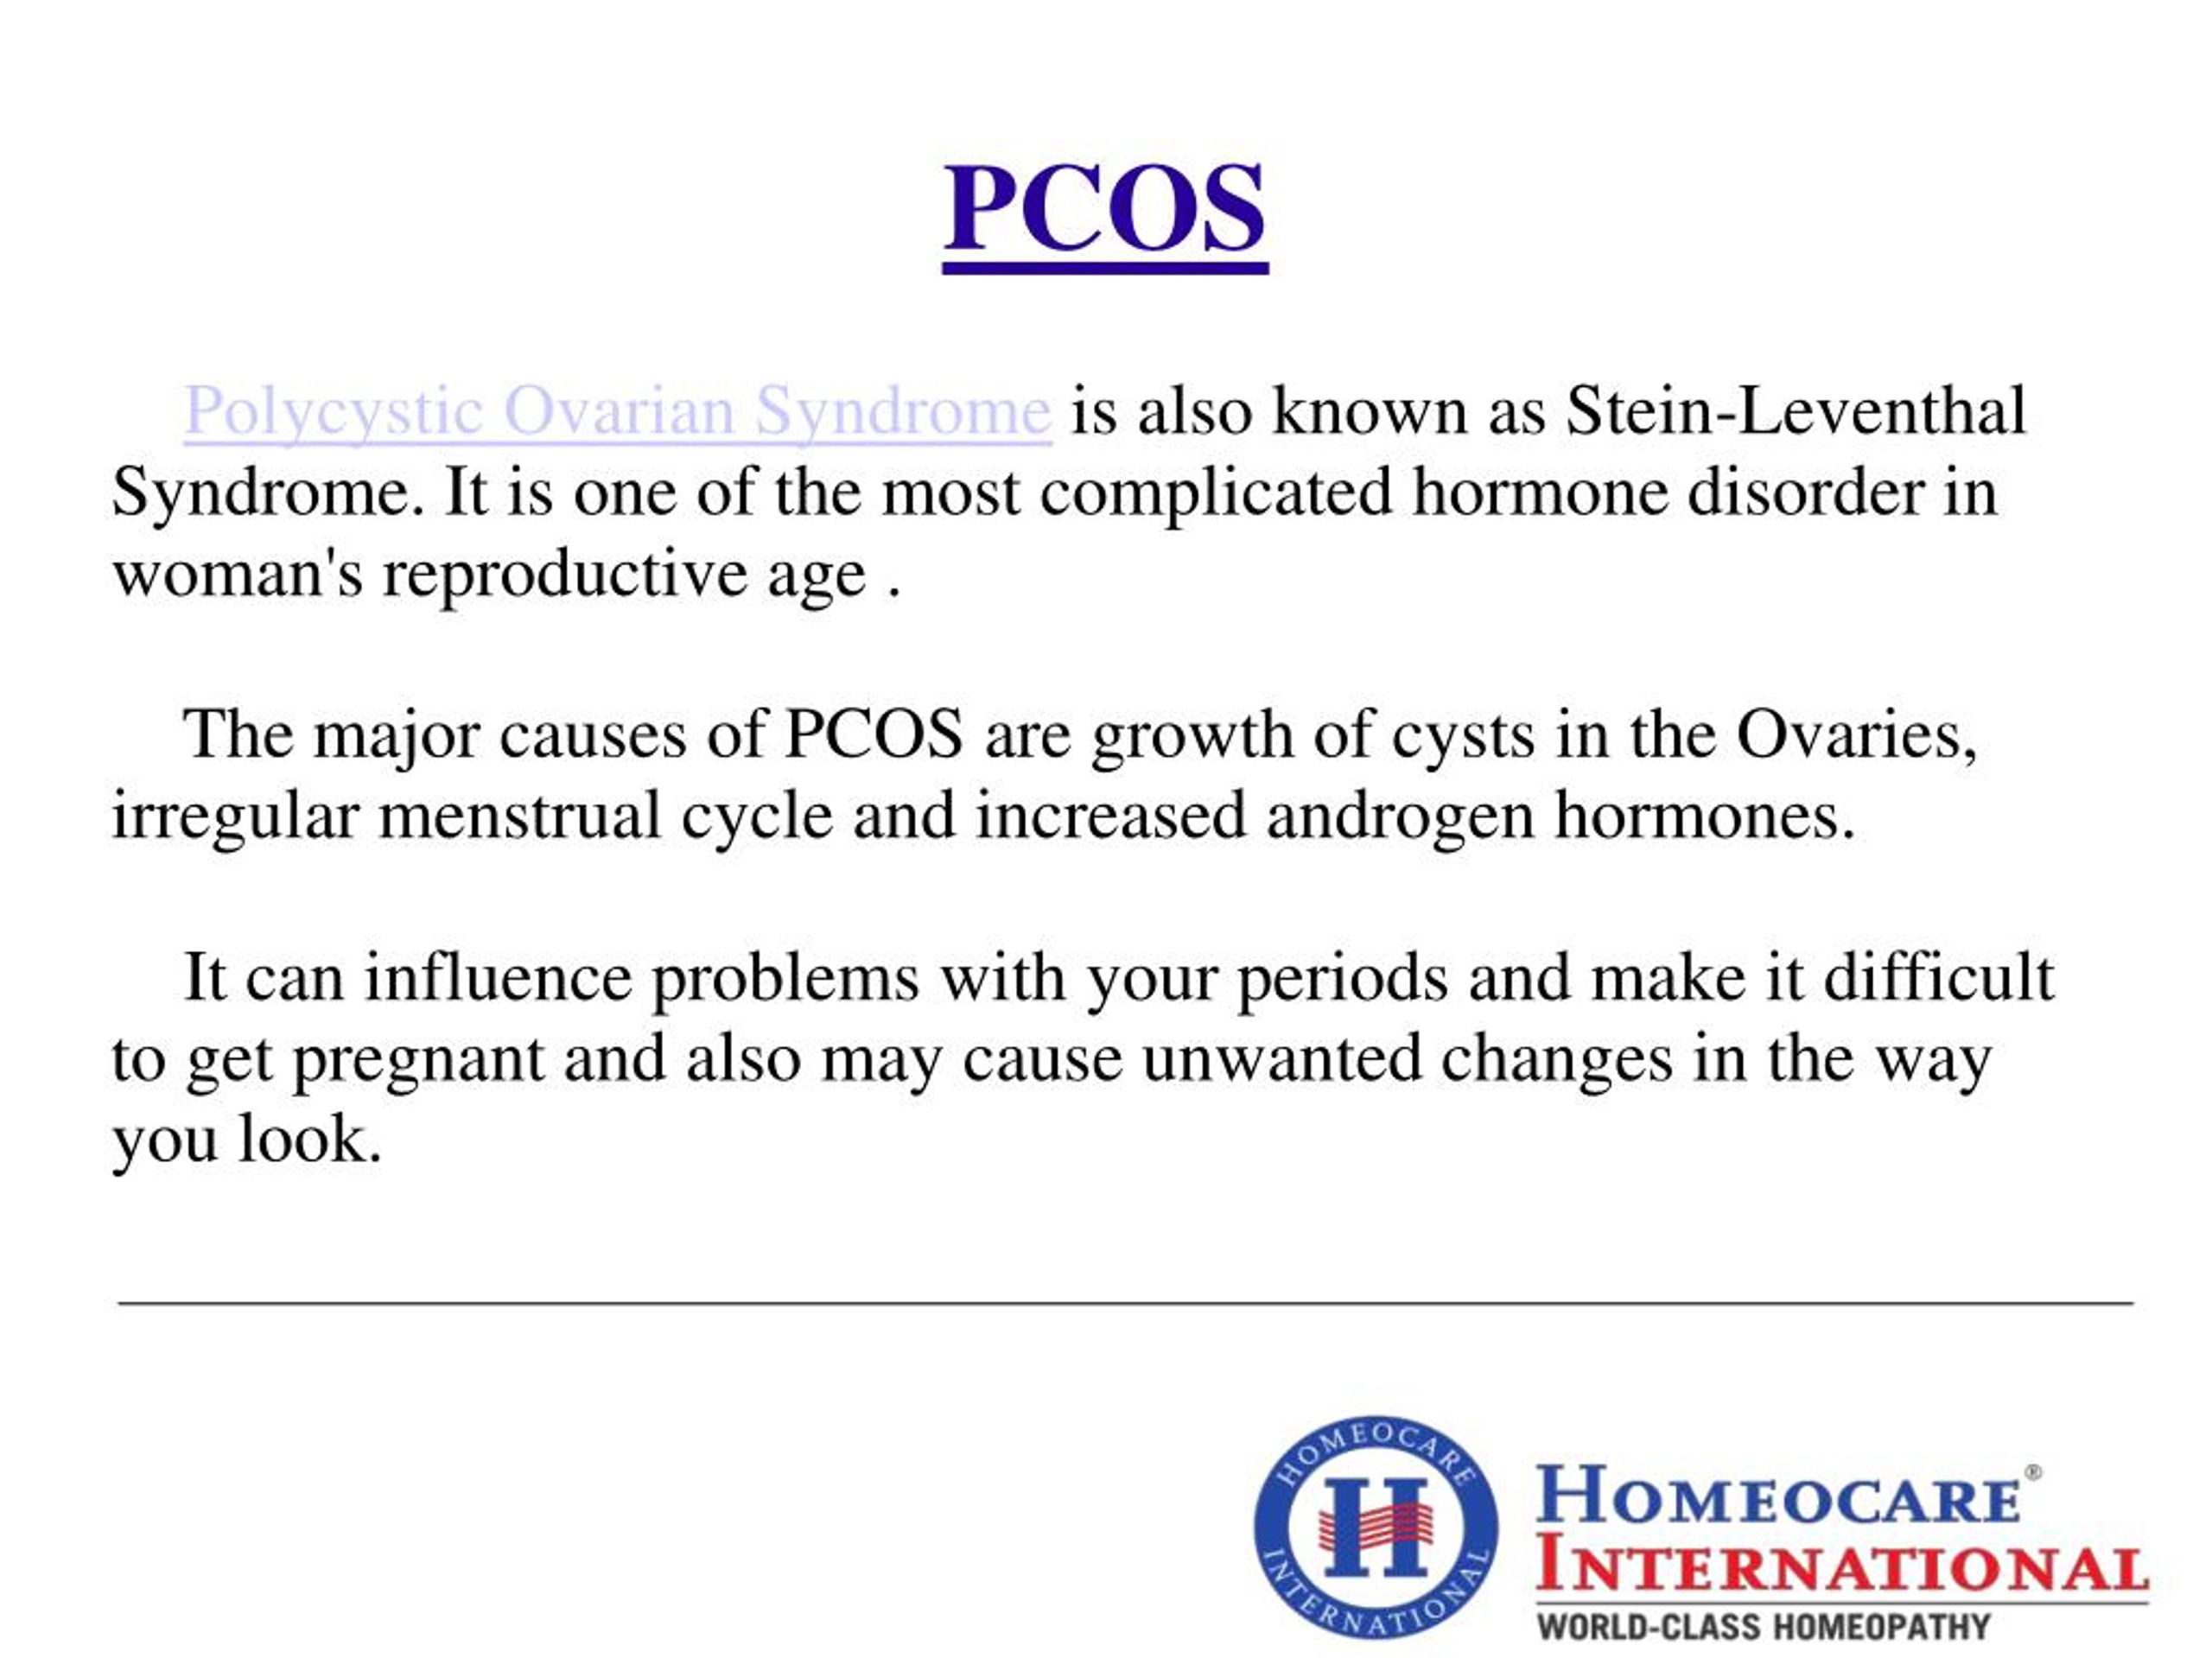 Ppt Homeopathy Treatment For Pcos Homeocare International